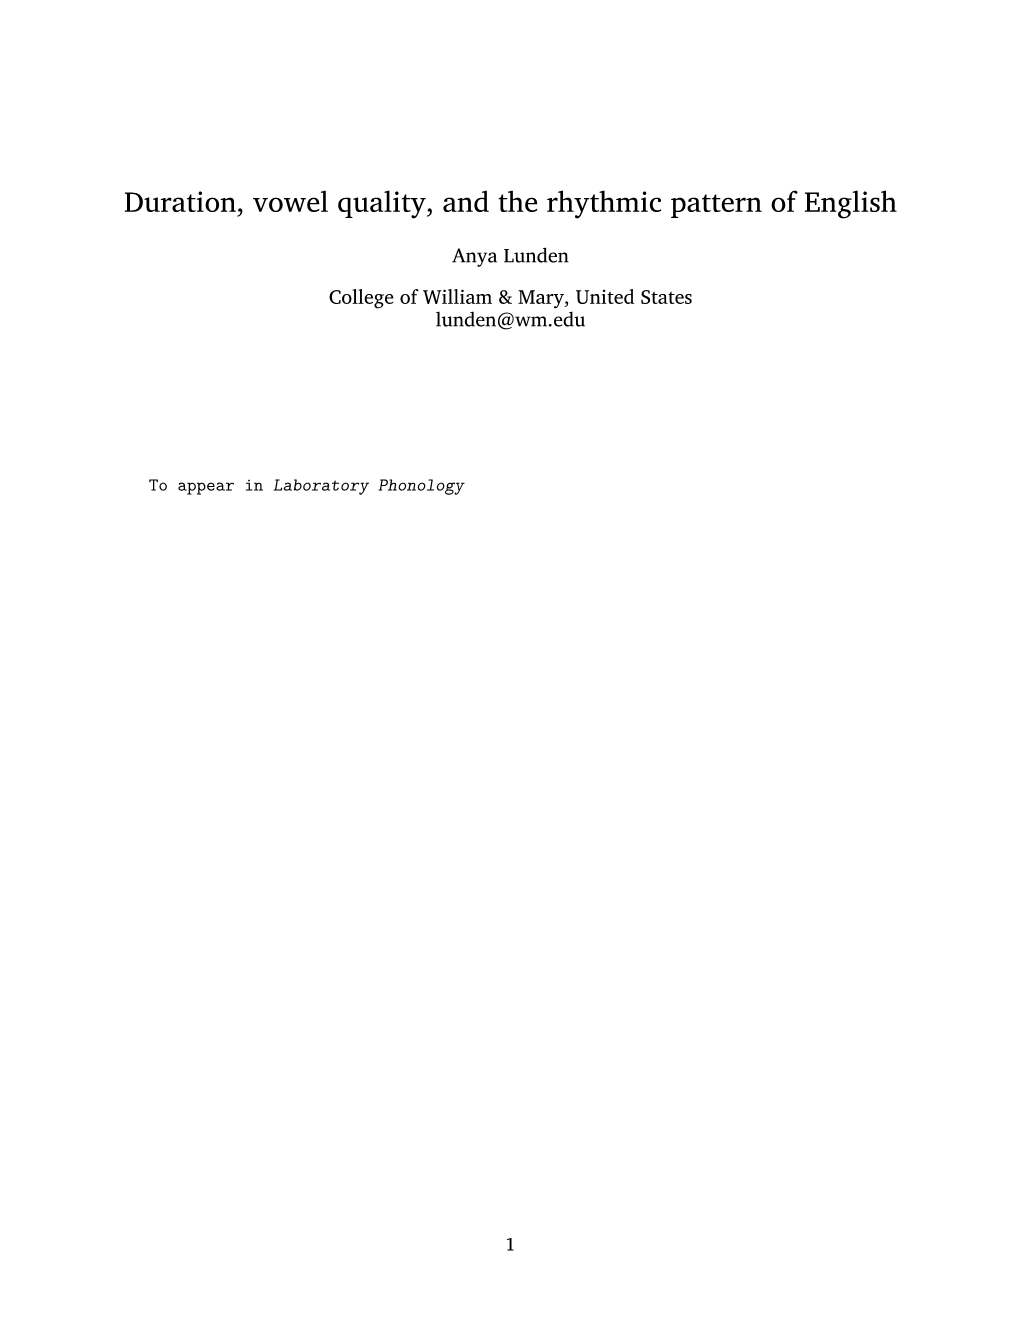 Duration, Vowel Quality, and the Rhythmic Pattern of English